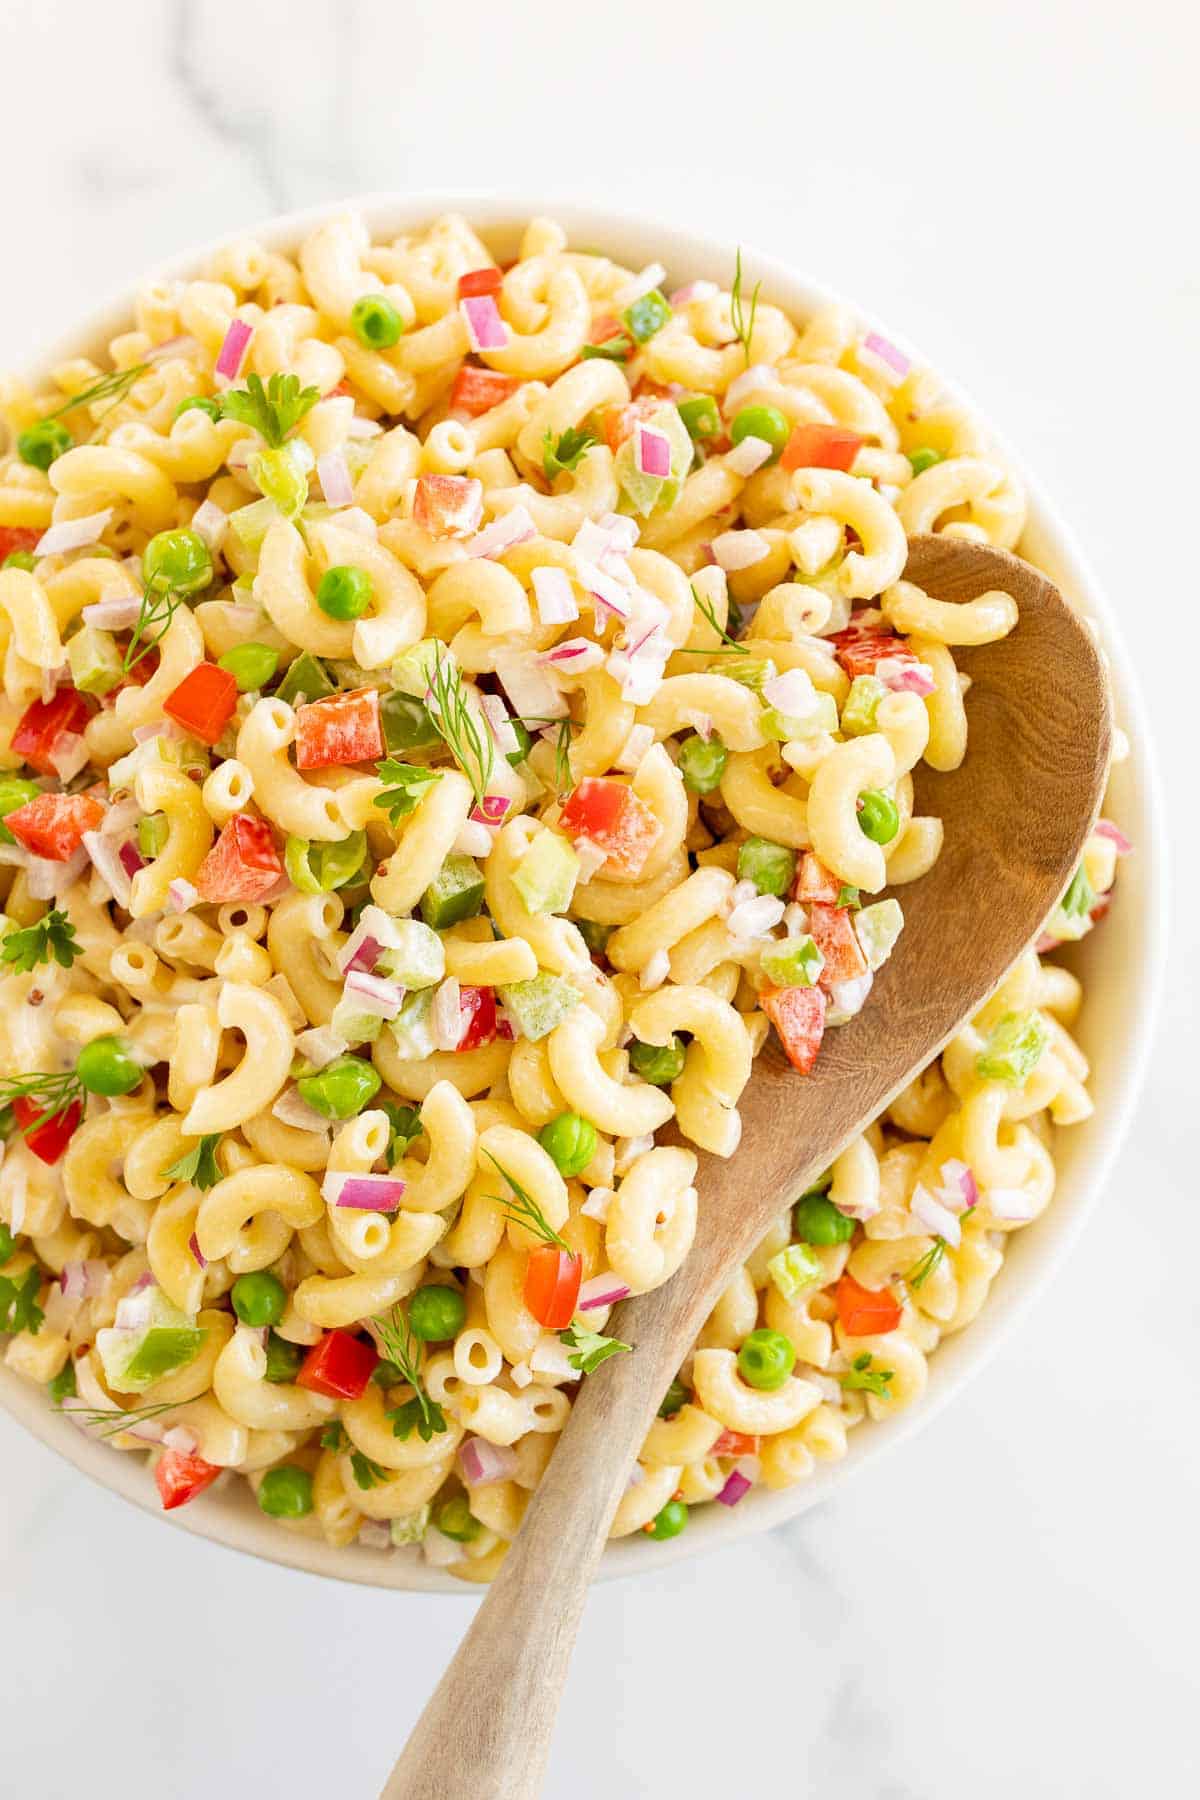 bowl of pasta salad with wood spoon